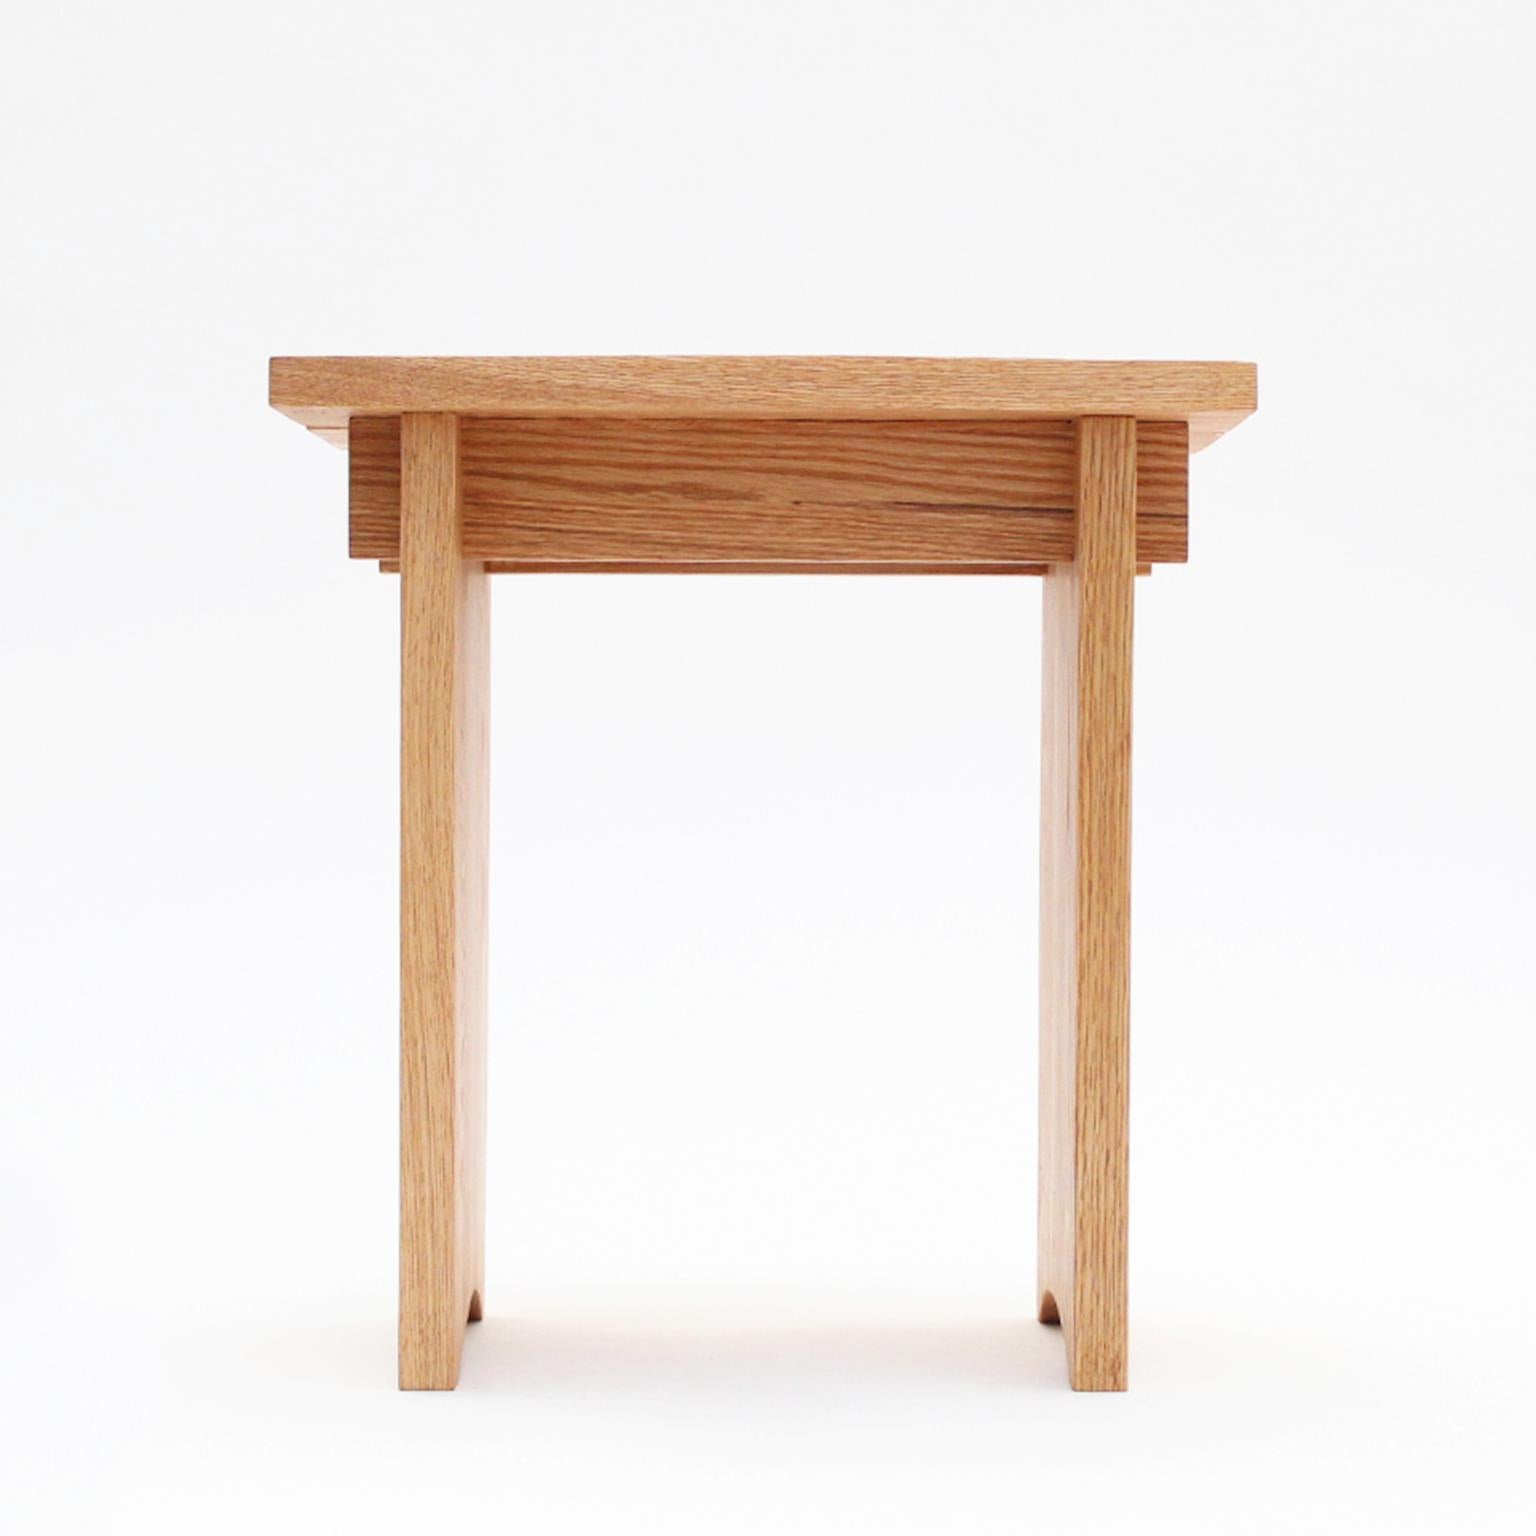 The Shirihiki stool is crafted with solid oakwood, handcrafted by artisans in México. Inspired
by a piece of furniture used in the Bunraku, the traditional puppet theatre of Japan that started in the Edo period in Osaka. Its Minimalist design and